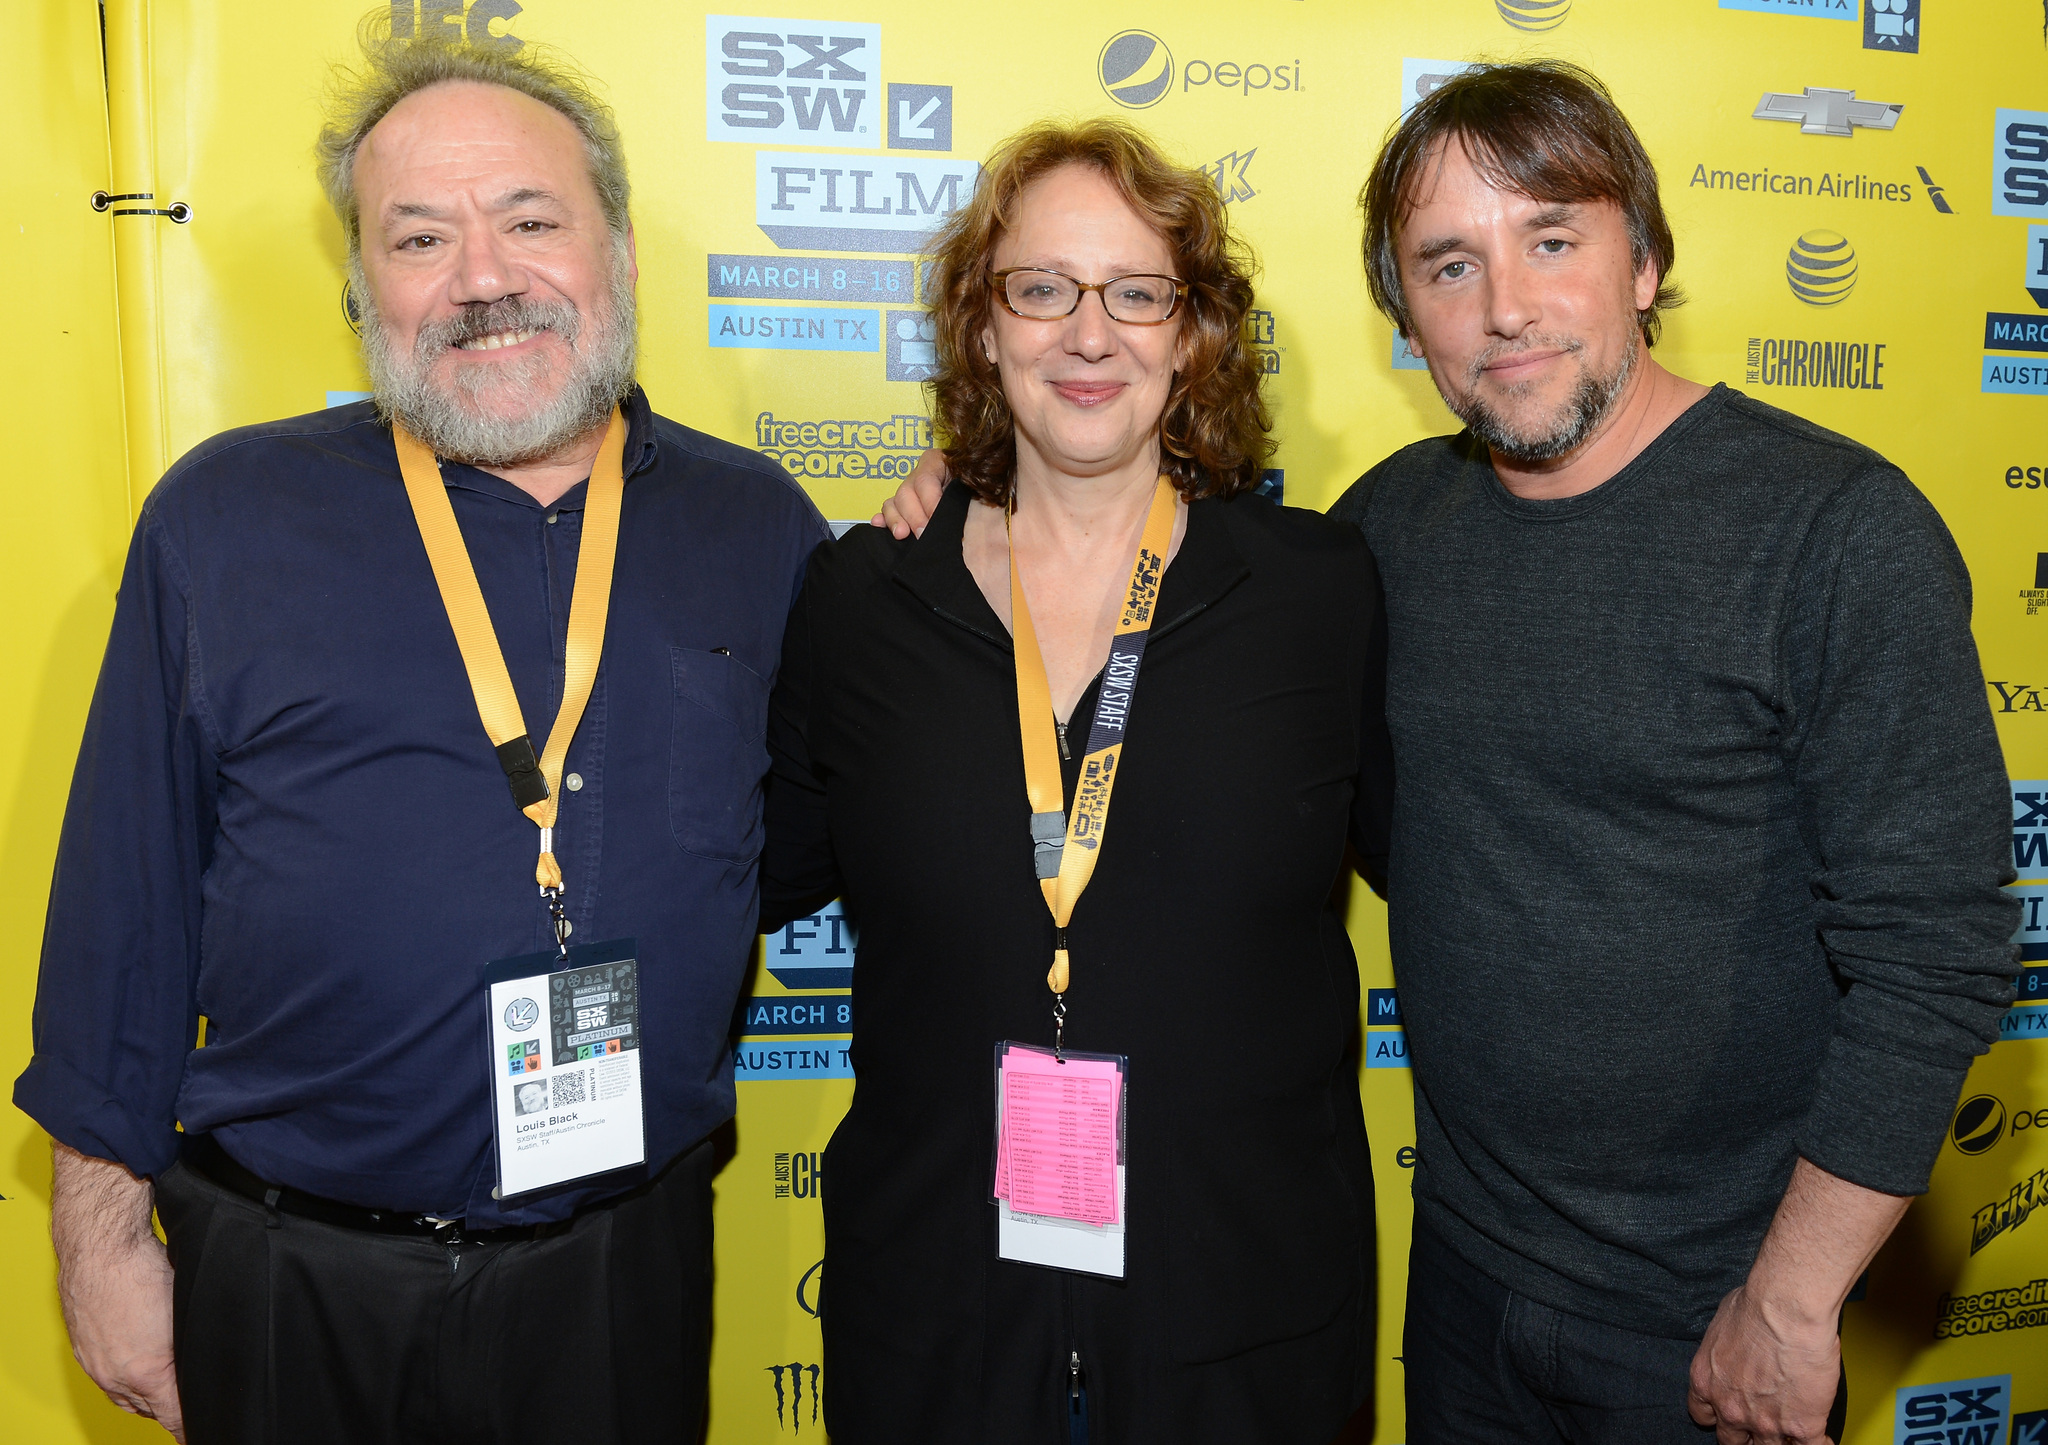 Richard Linklater, Janet Pierson and Louis Black at event of Pries vidurnakti (2013)